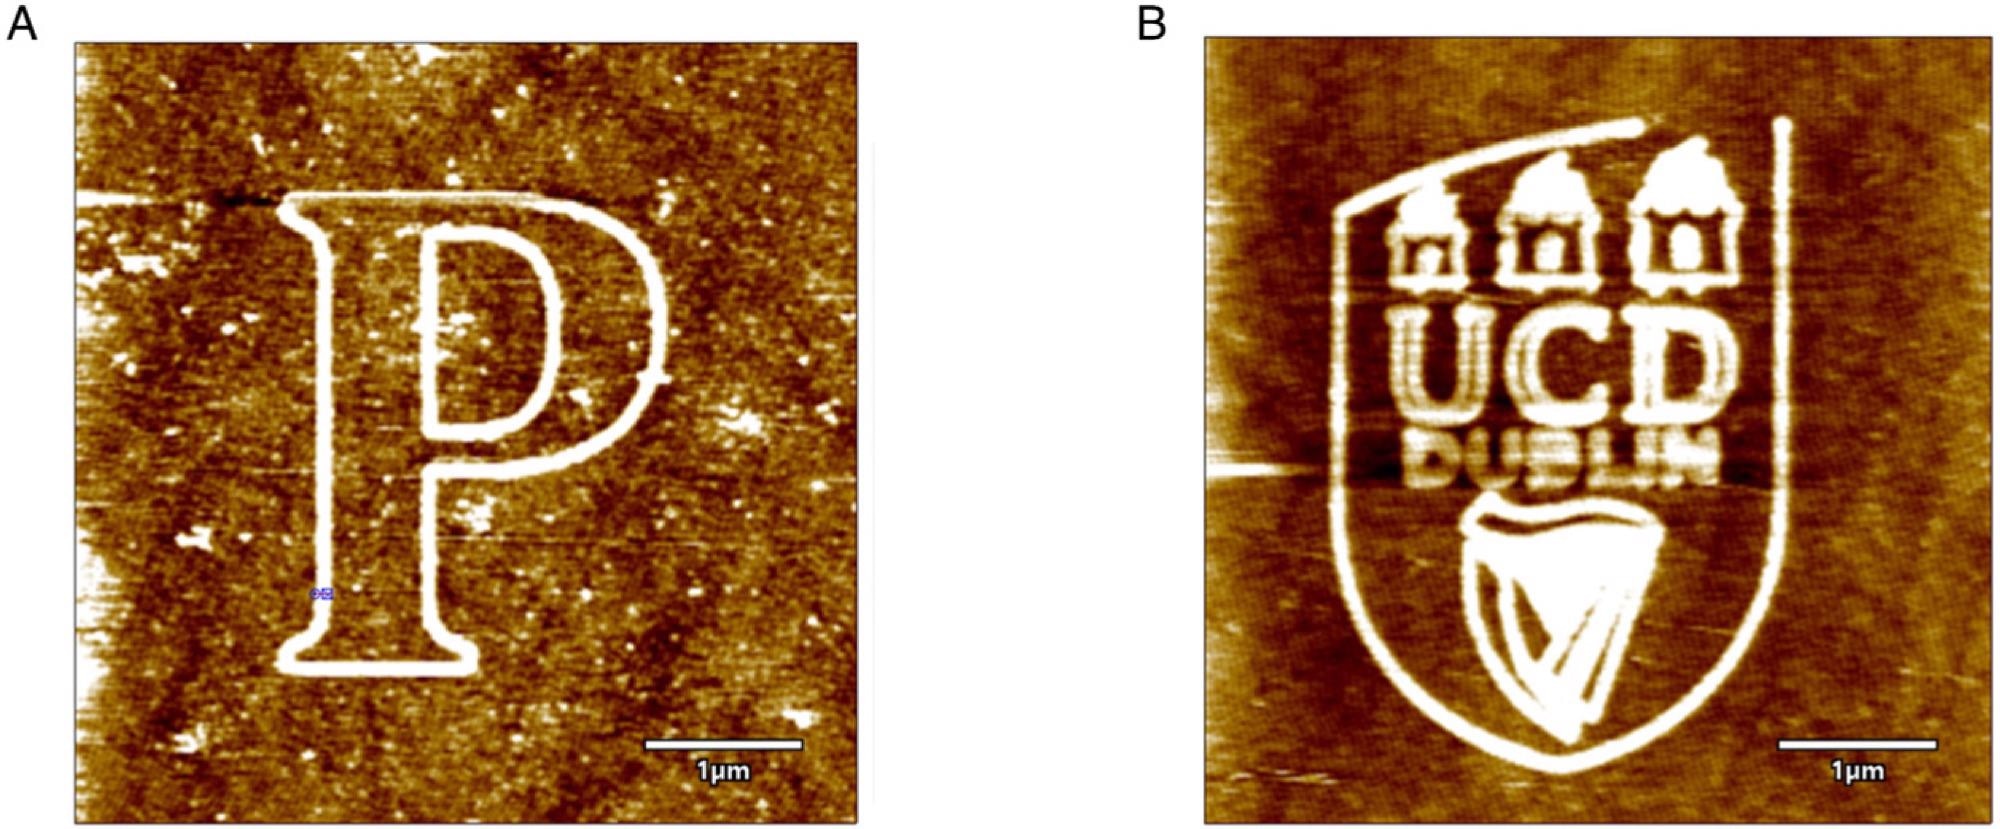 The intrinsic patterns fabricated over silicon substrate: (A) Letter ‘P’, and (B) UCD logo. FT = 0.1 µN and tip bias of 7 V, RH = 75%, VT = 1 µm/s.